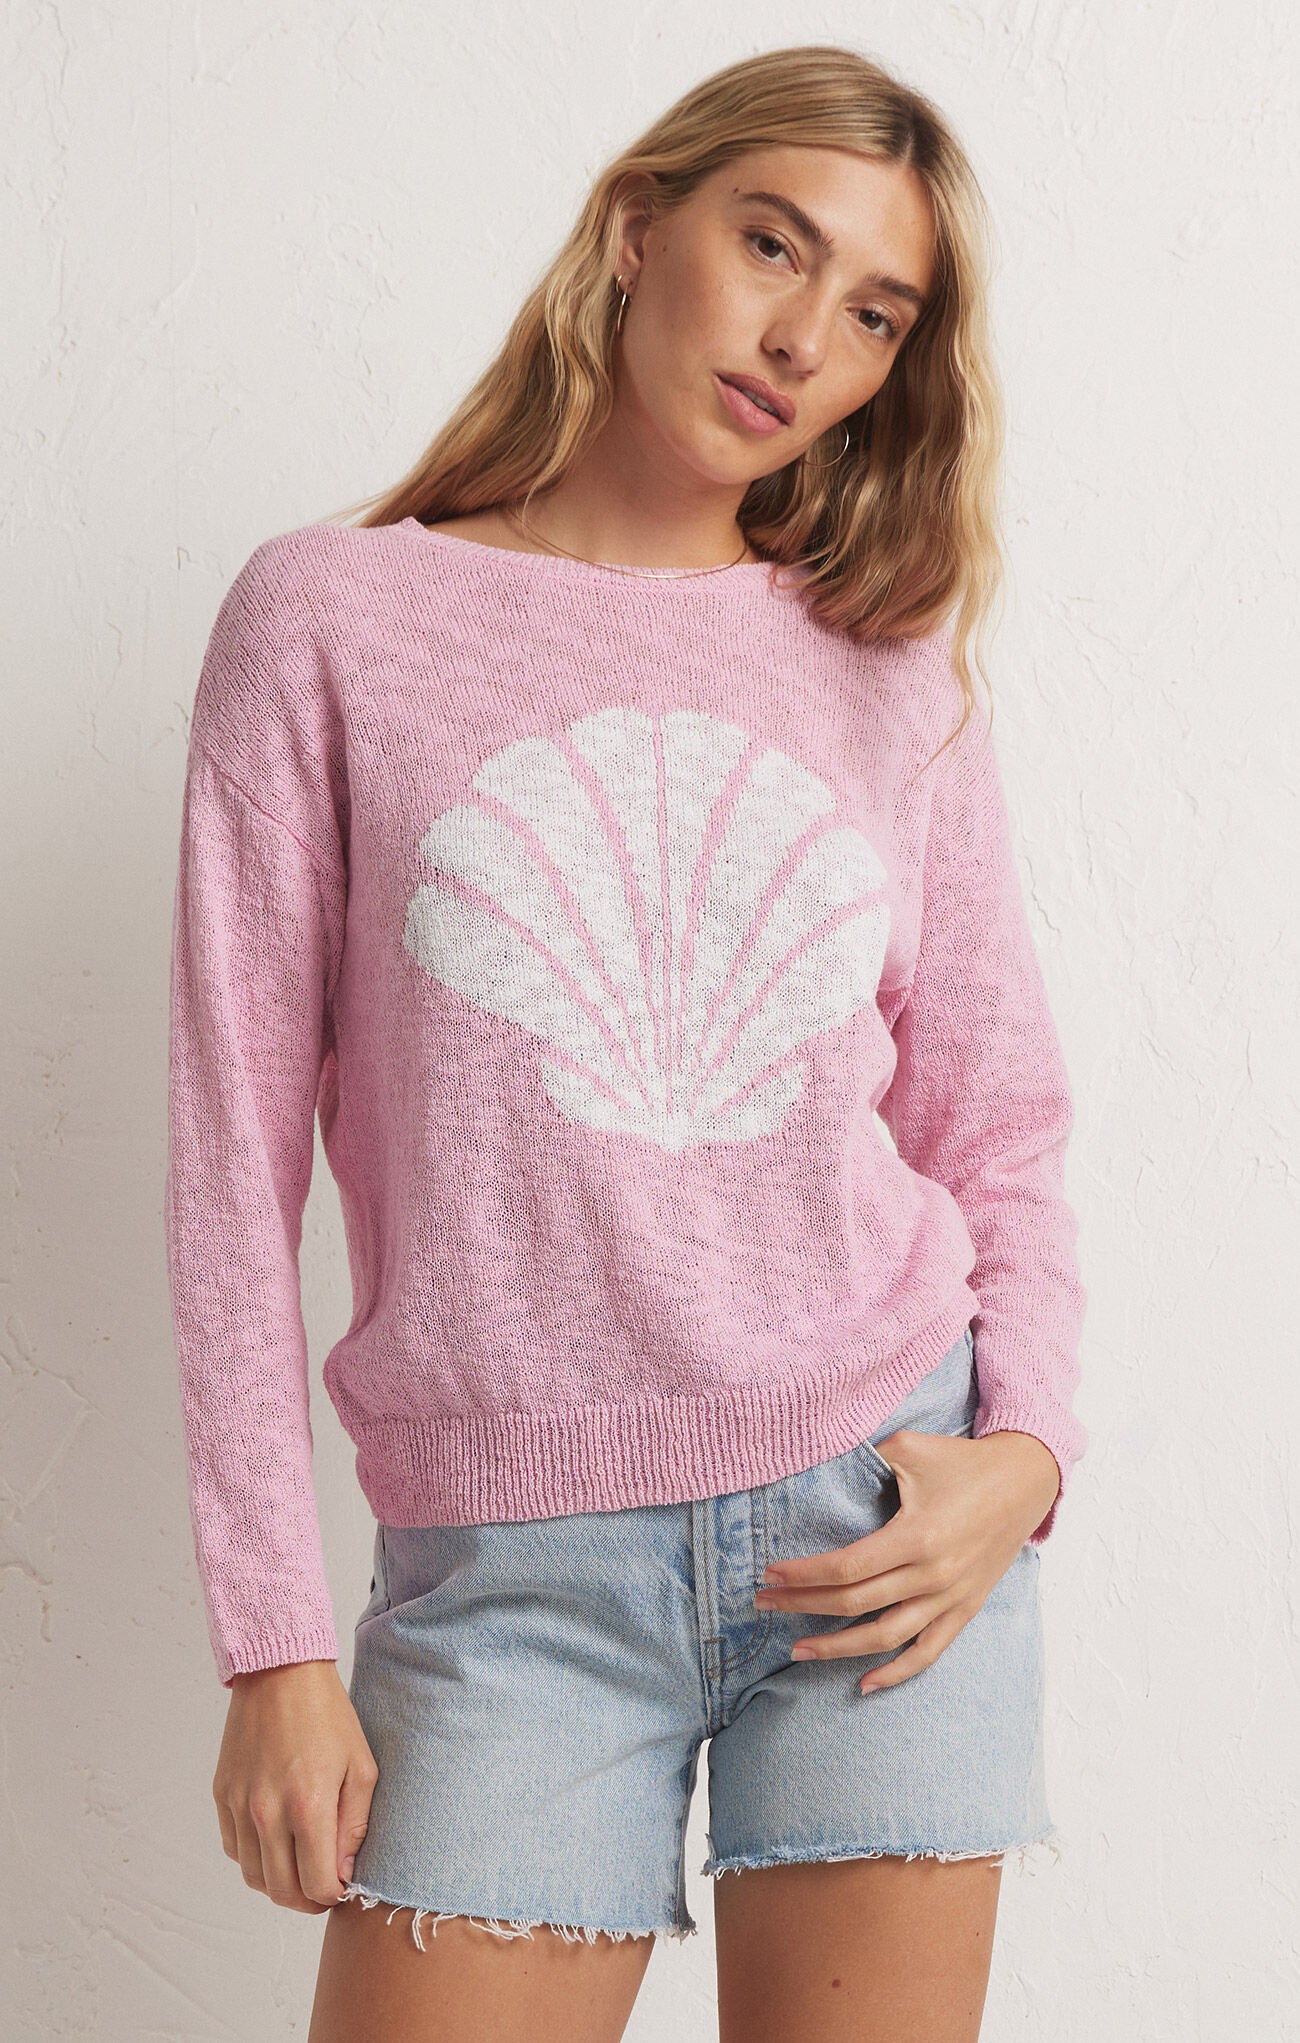 Z SUPPLY SHELL YEAH SWEATER IN HIBISCUS